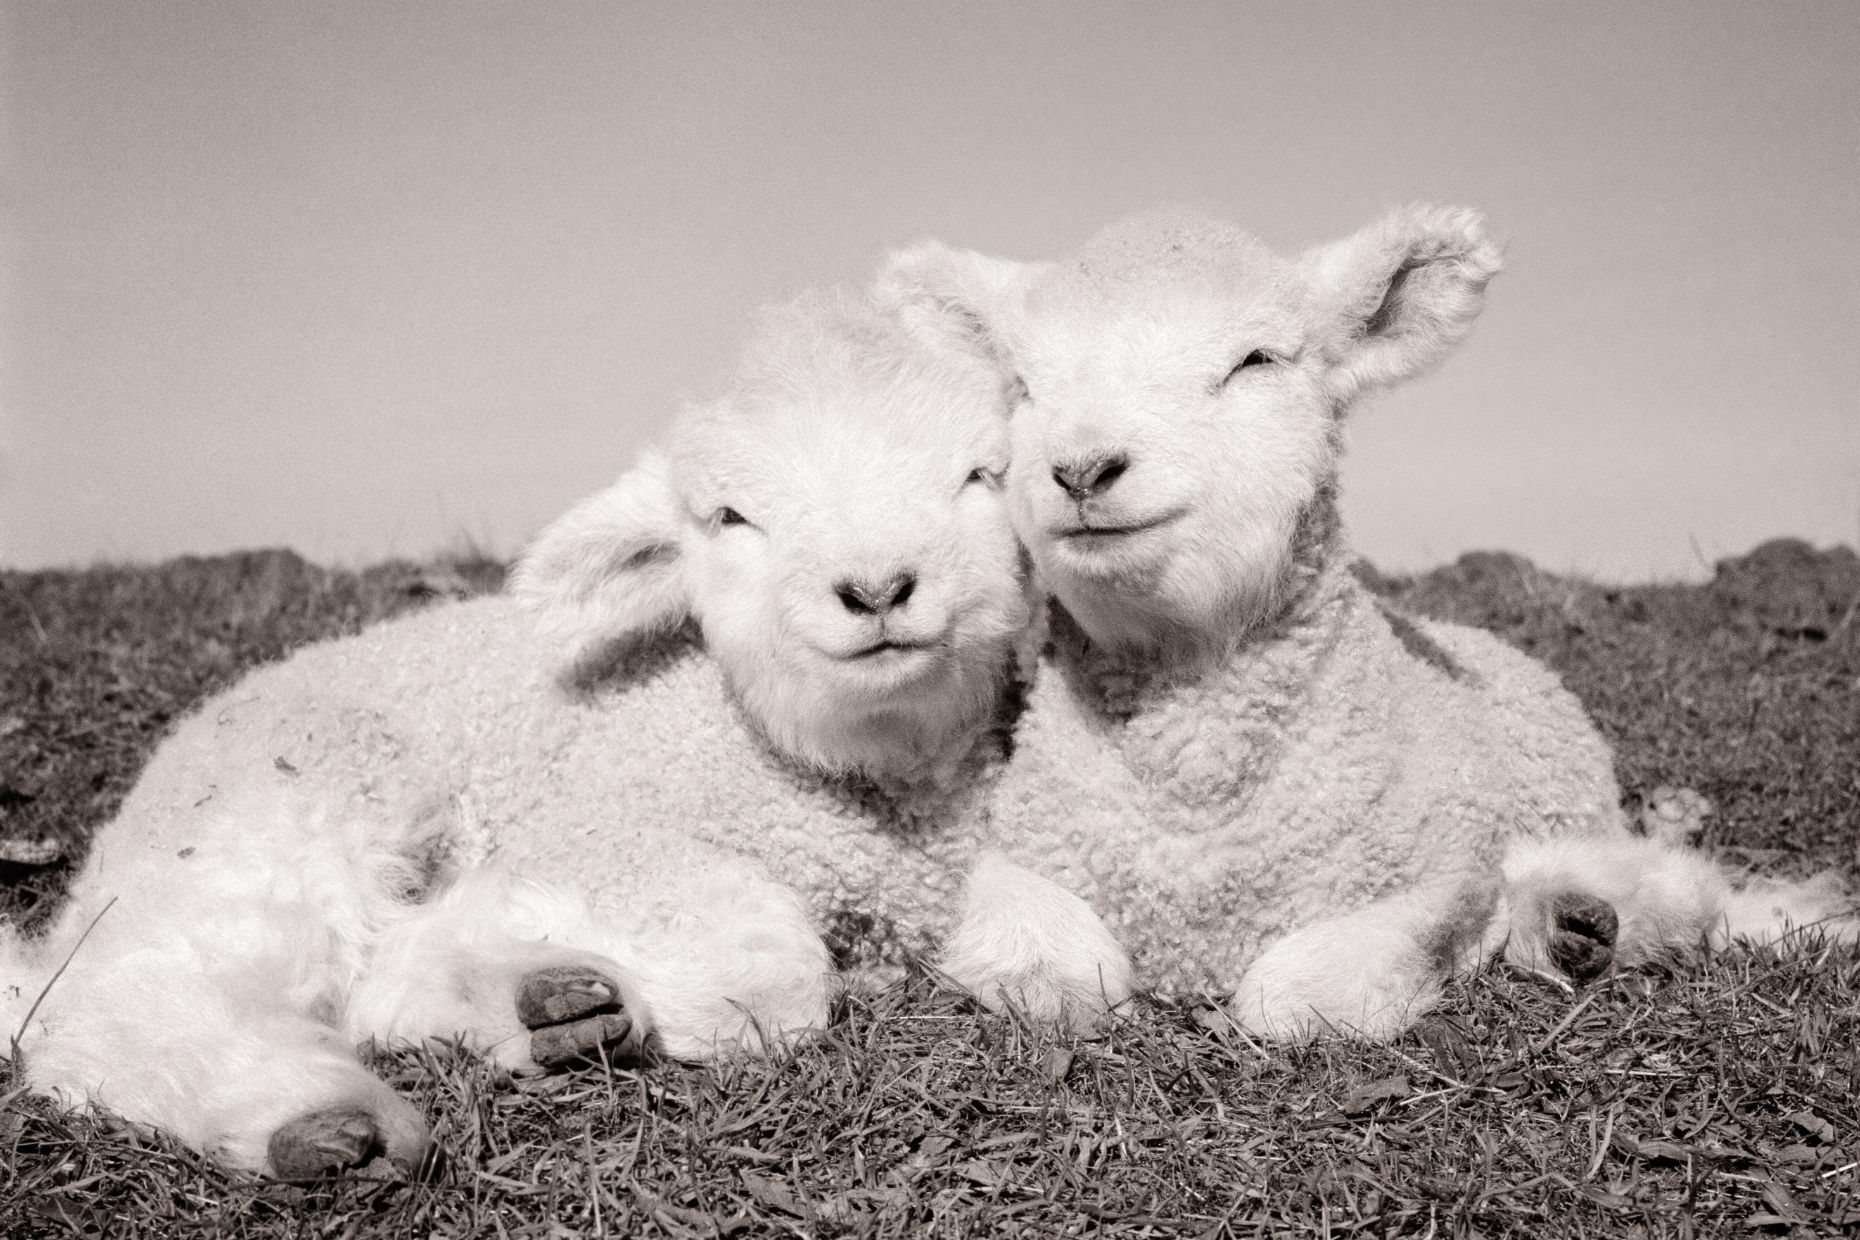 TWO NEW BABY SPRING LAMBS LYING SIDE BY SIDE HEADS TOGETHER LOOKING AT CAMERA